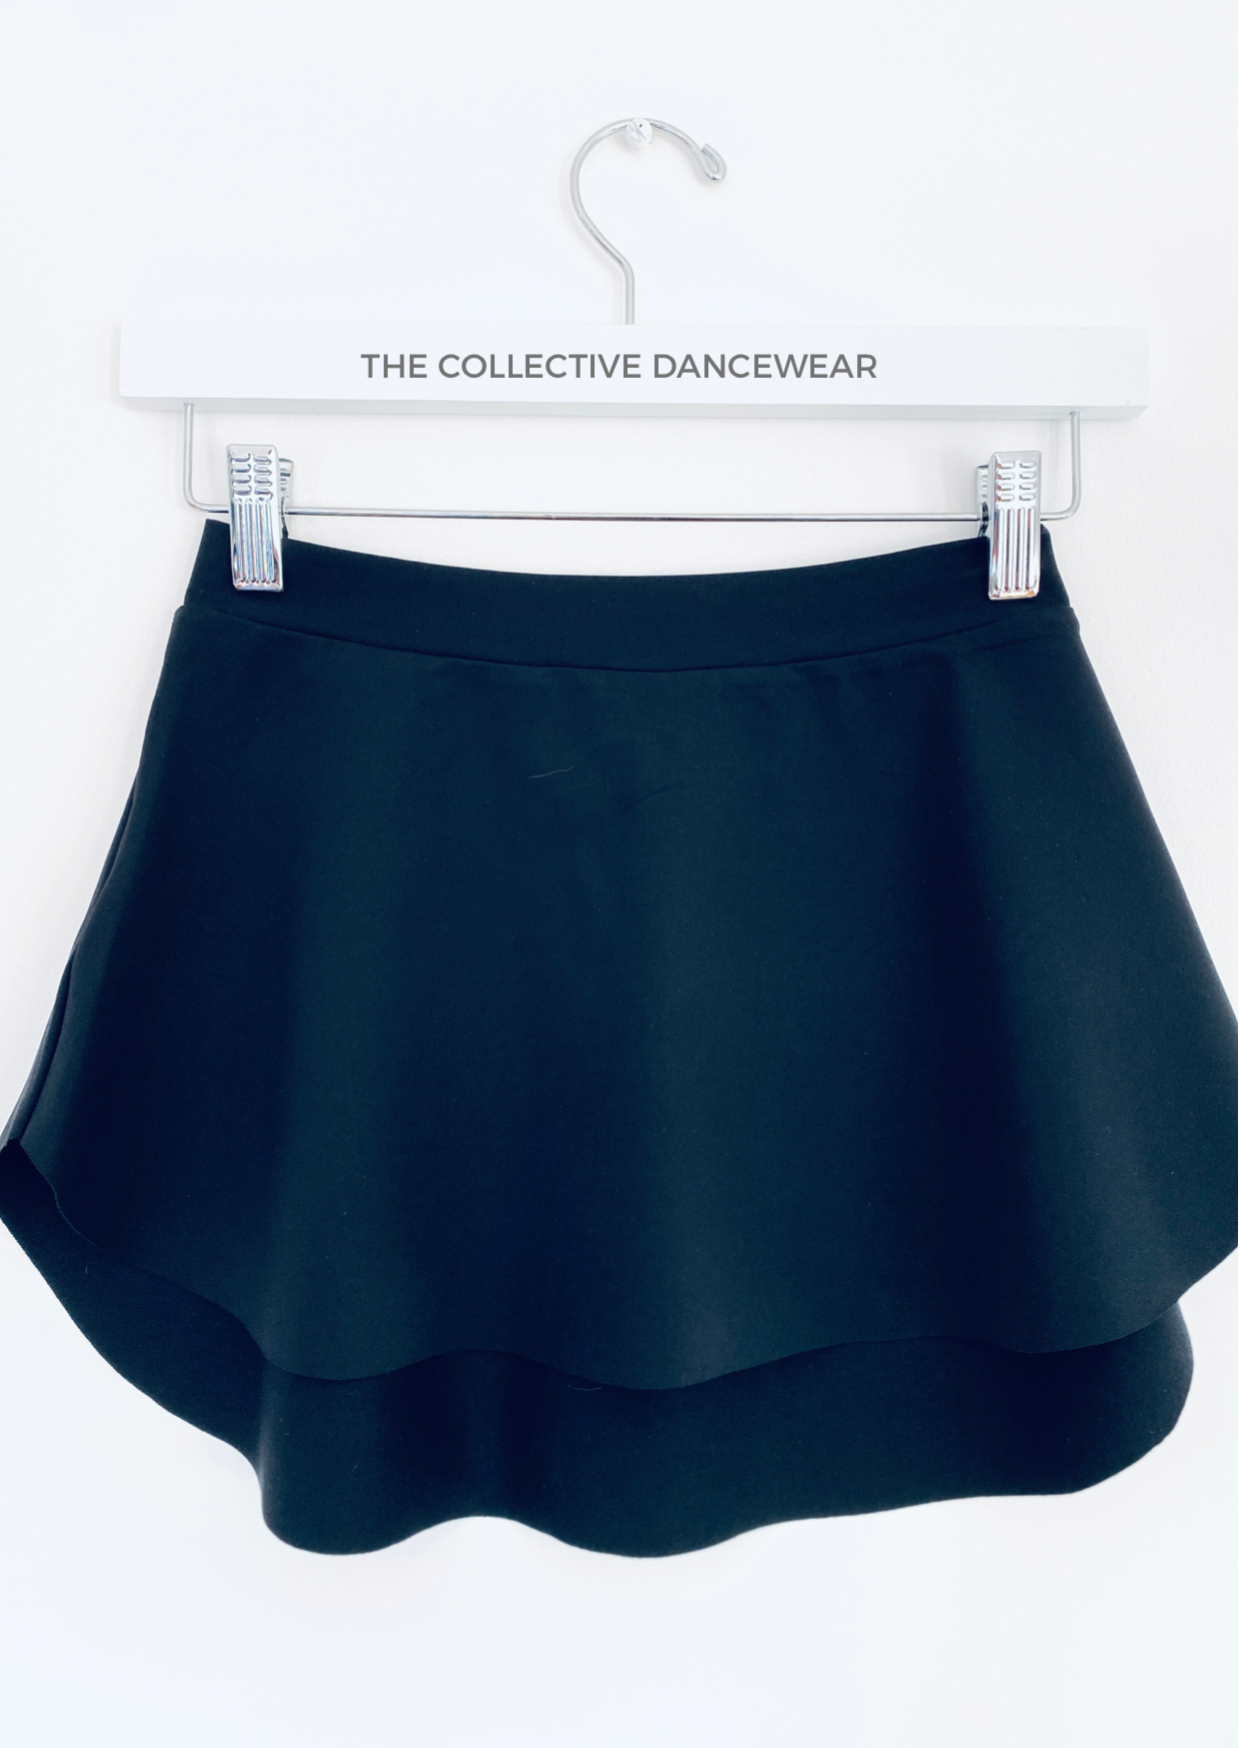 Ballet skirt in SAB style cut in Black from The Collective Dancewear